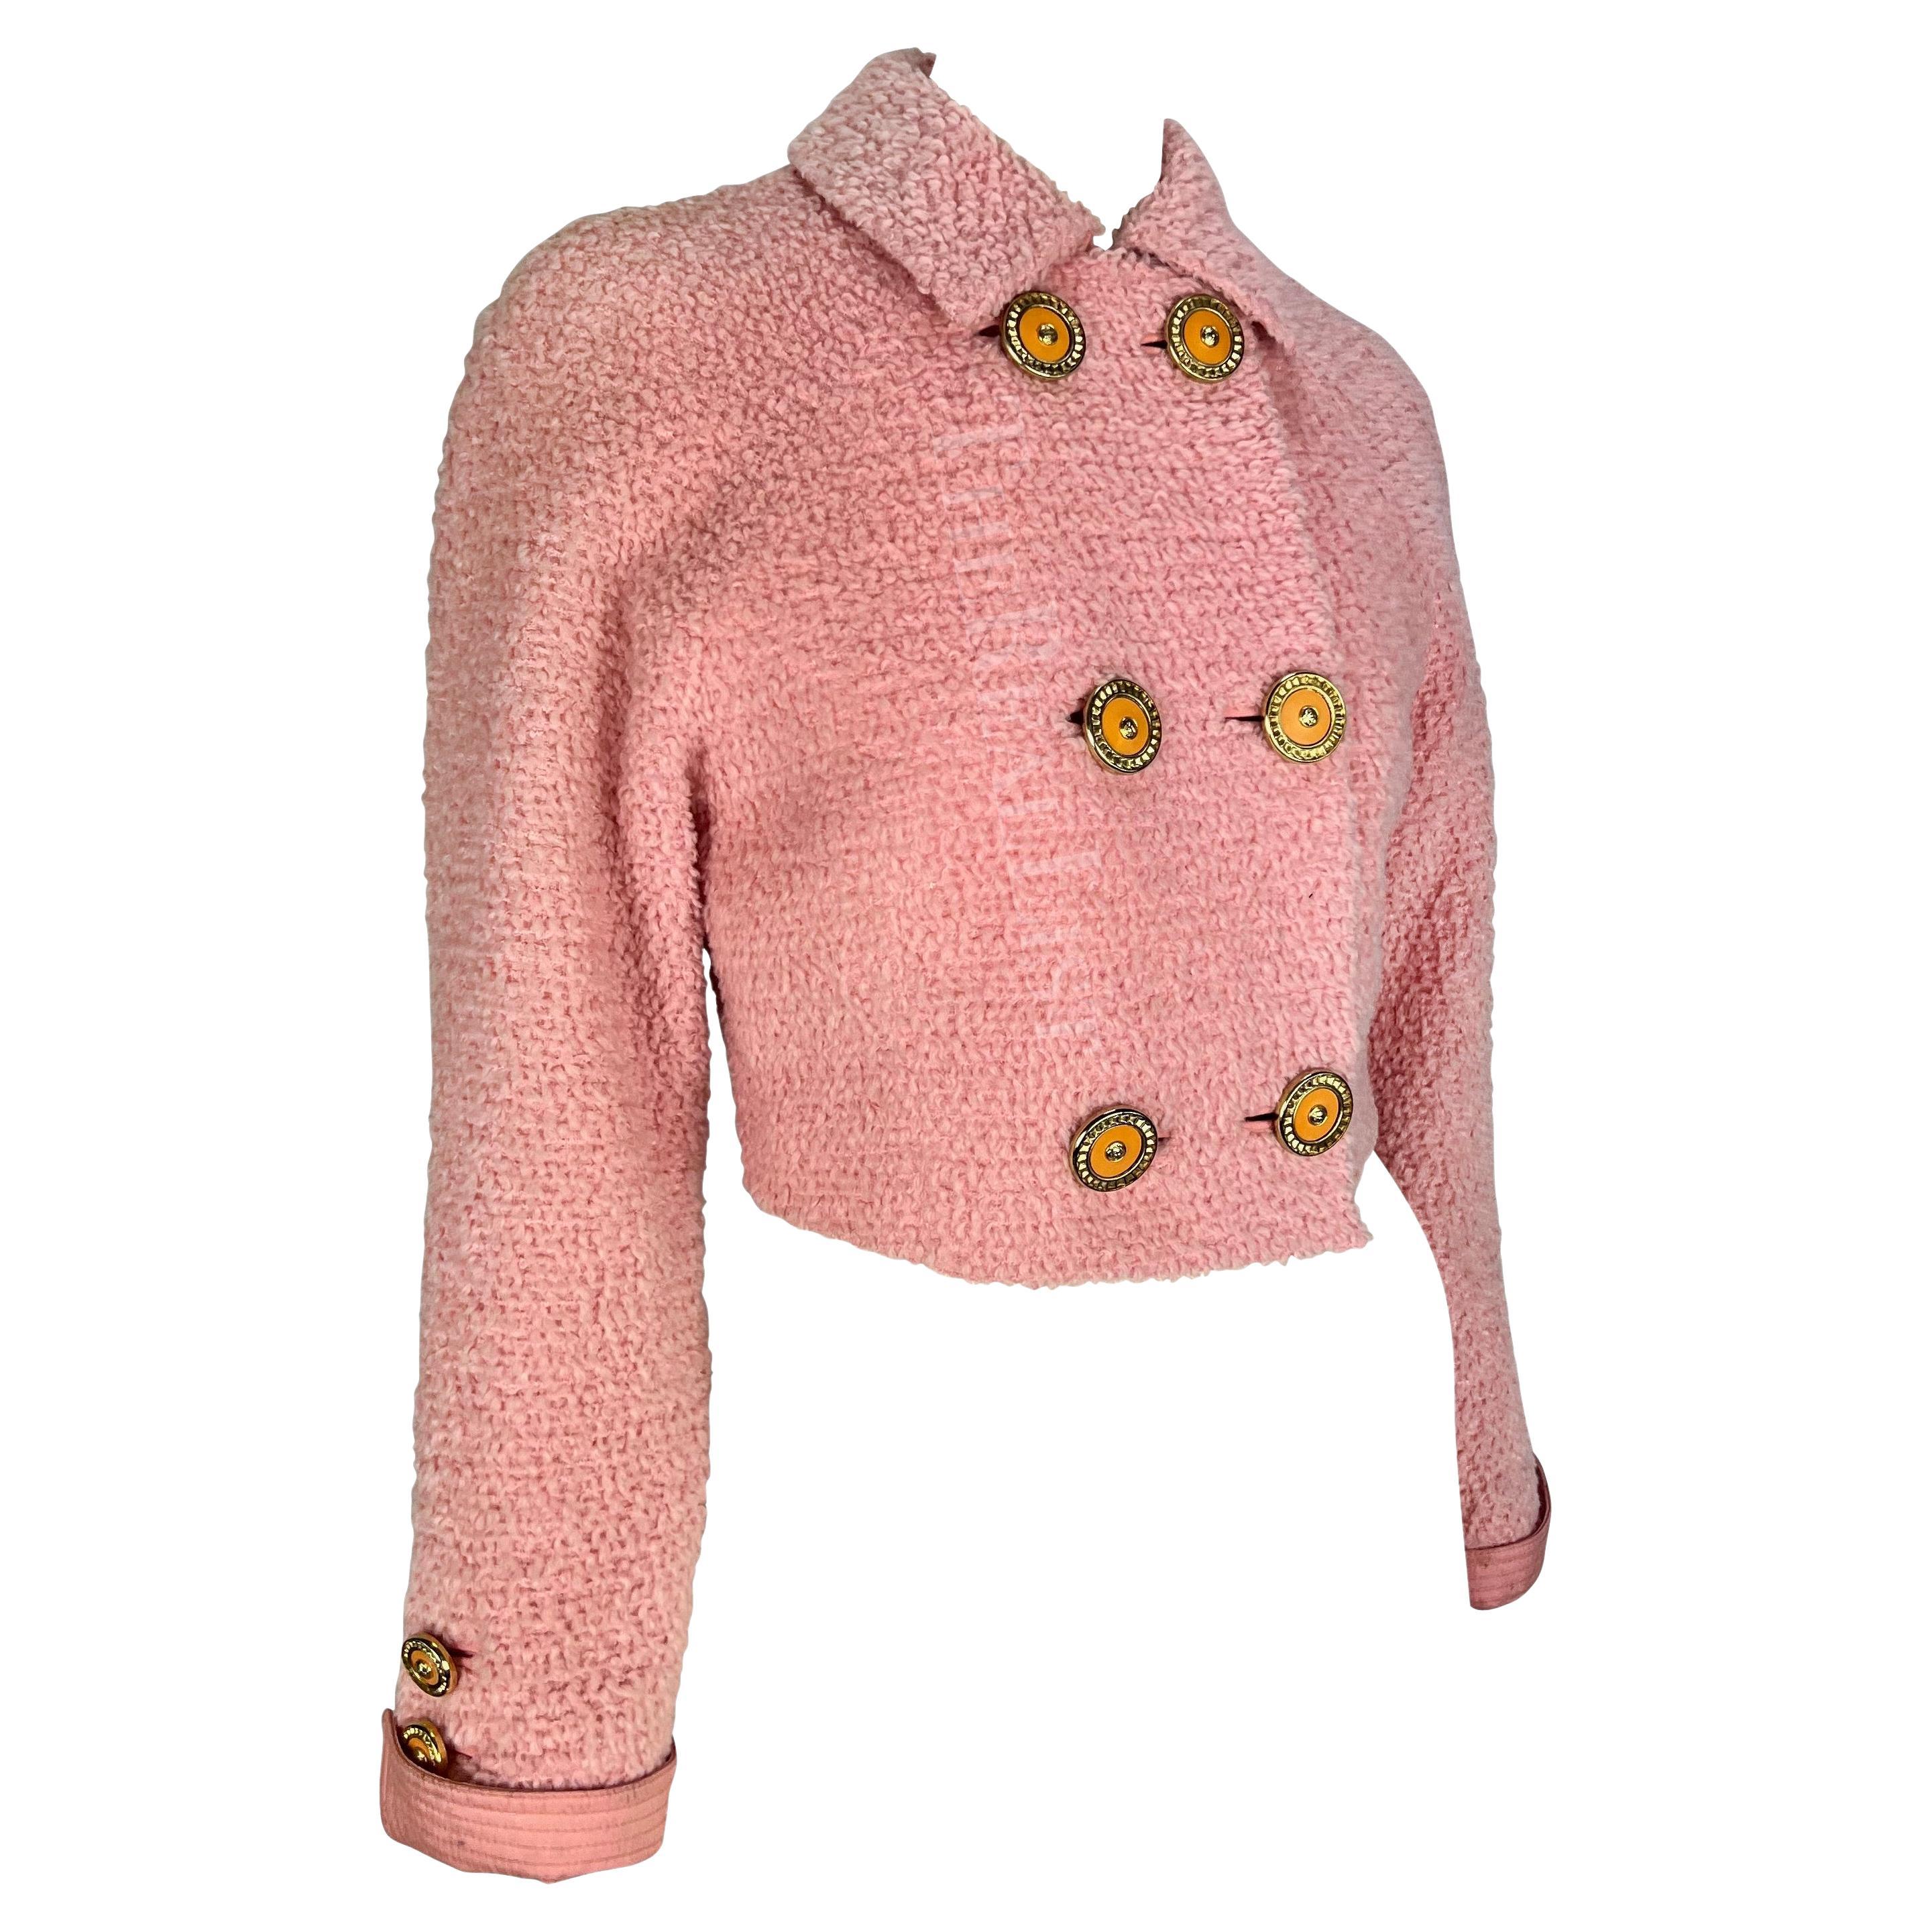 F/W 1994 Gianni Versace Light Pink Tweed Cropped Double Breasted Runway Jacket For Sale 4